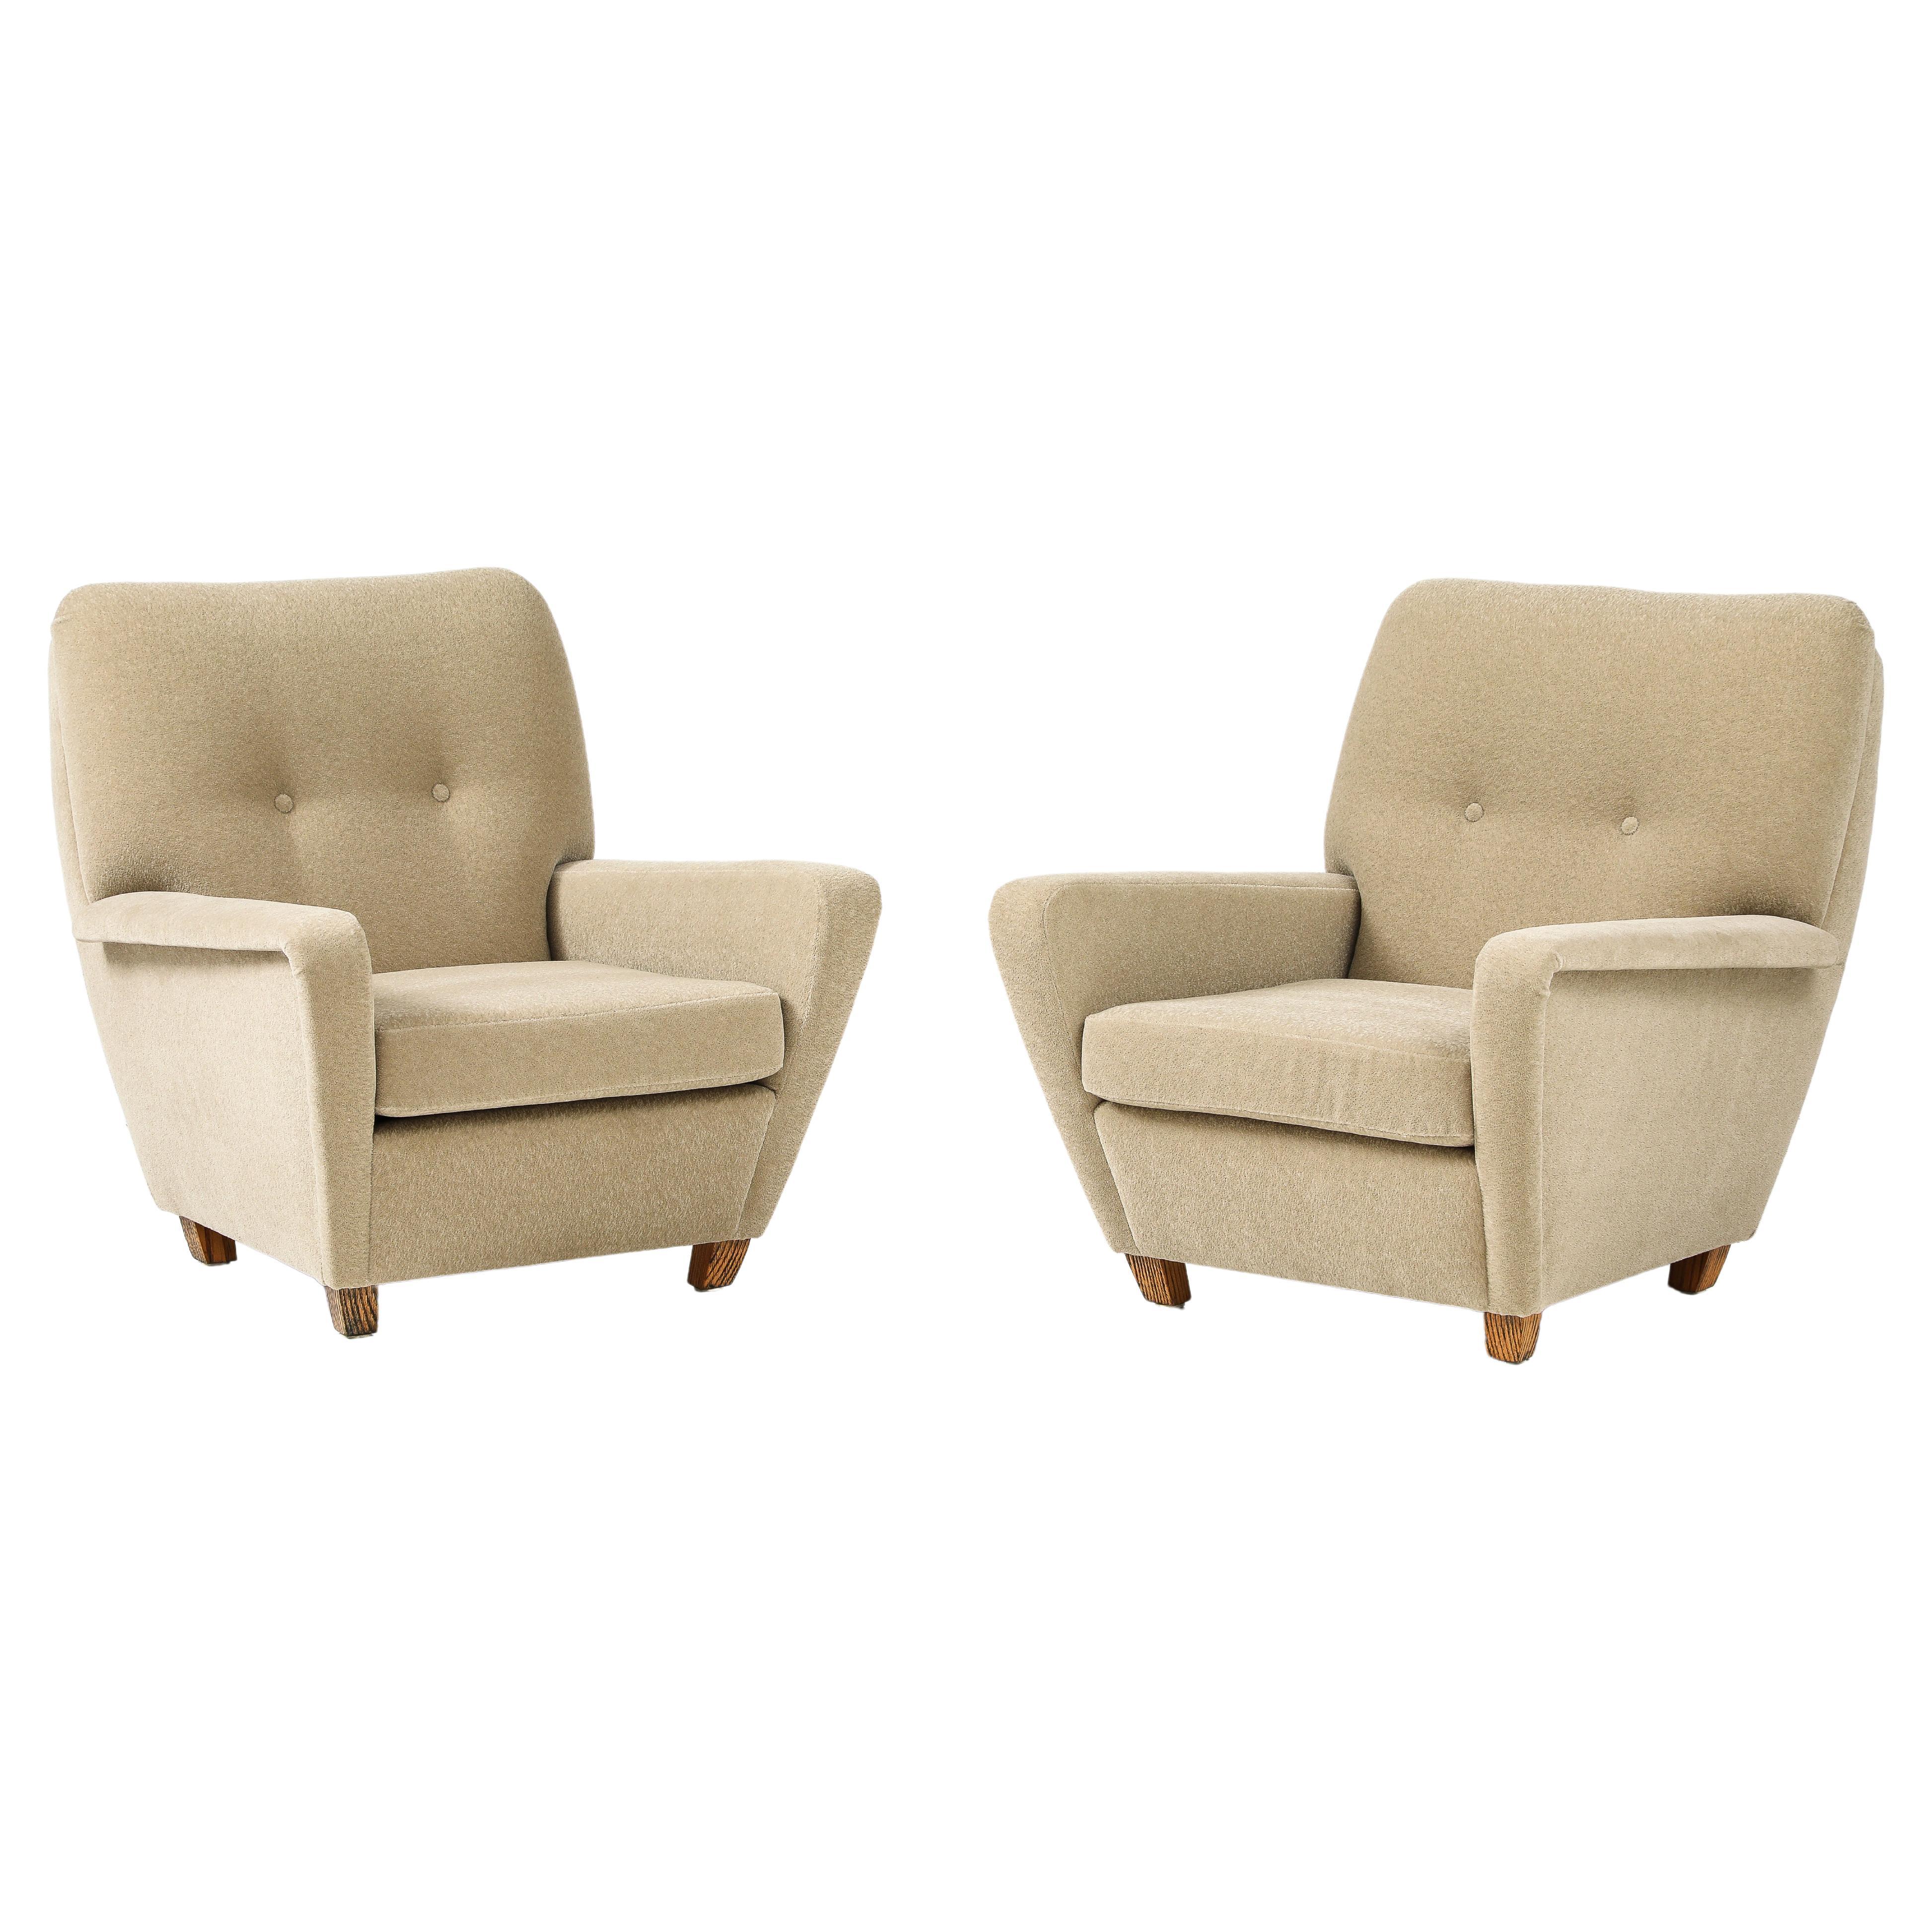 1950's French Lounge Chairs Upholstered In Donghia Mohair Fabric